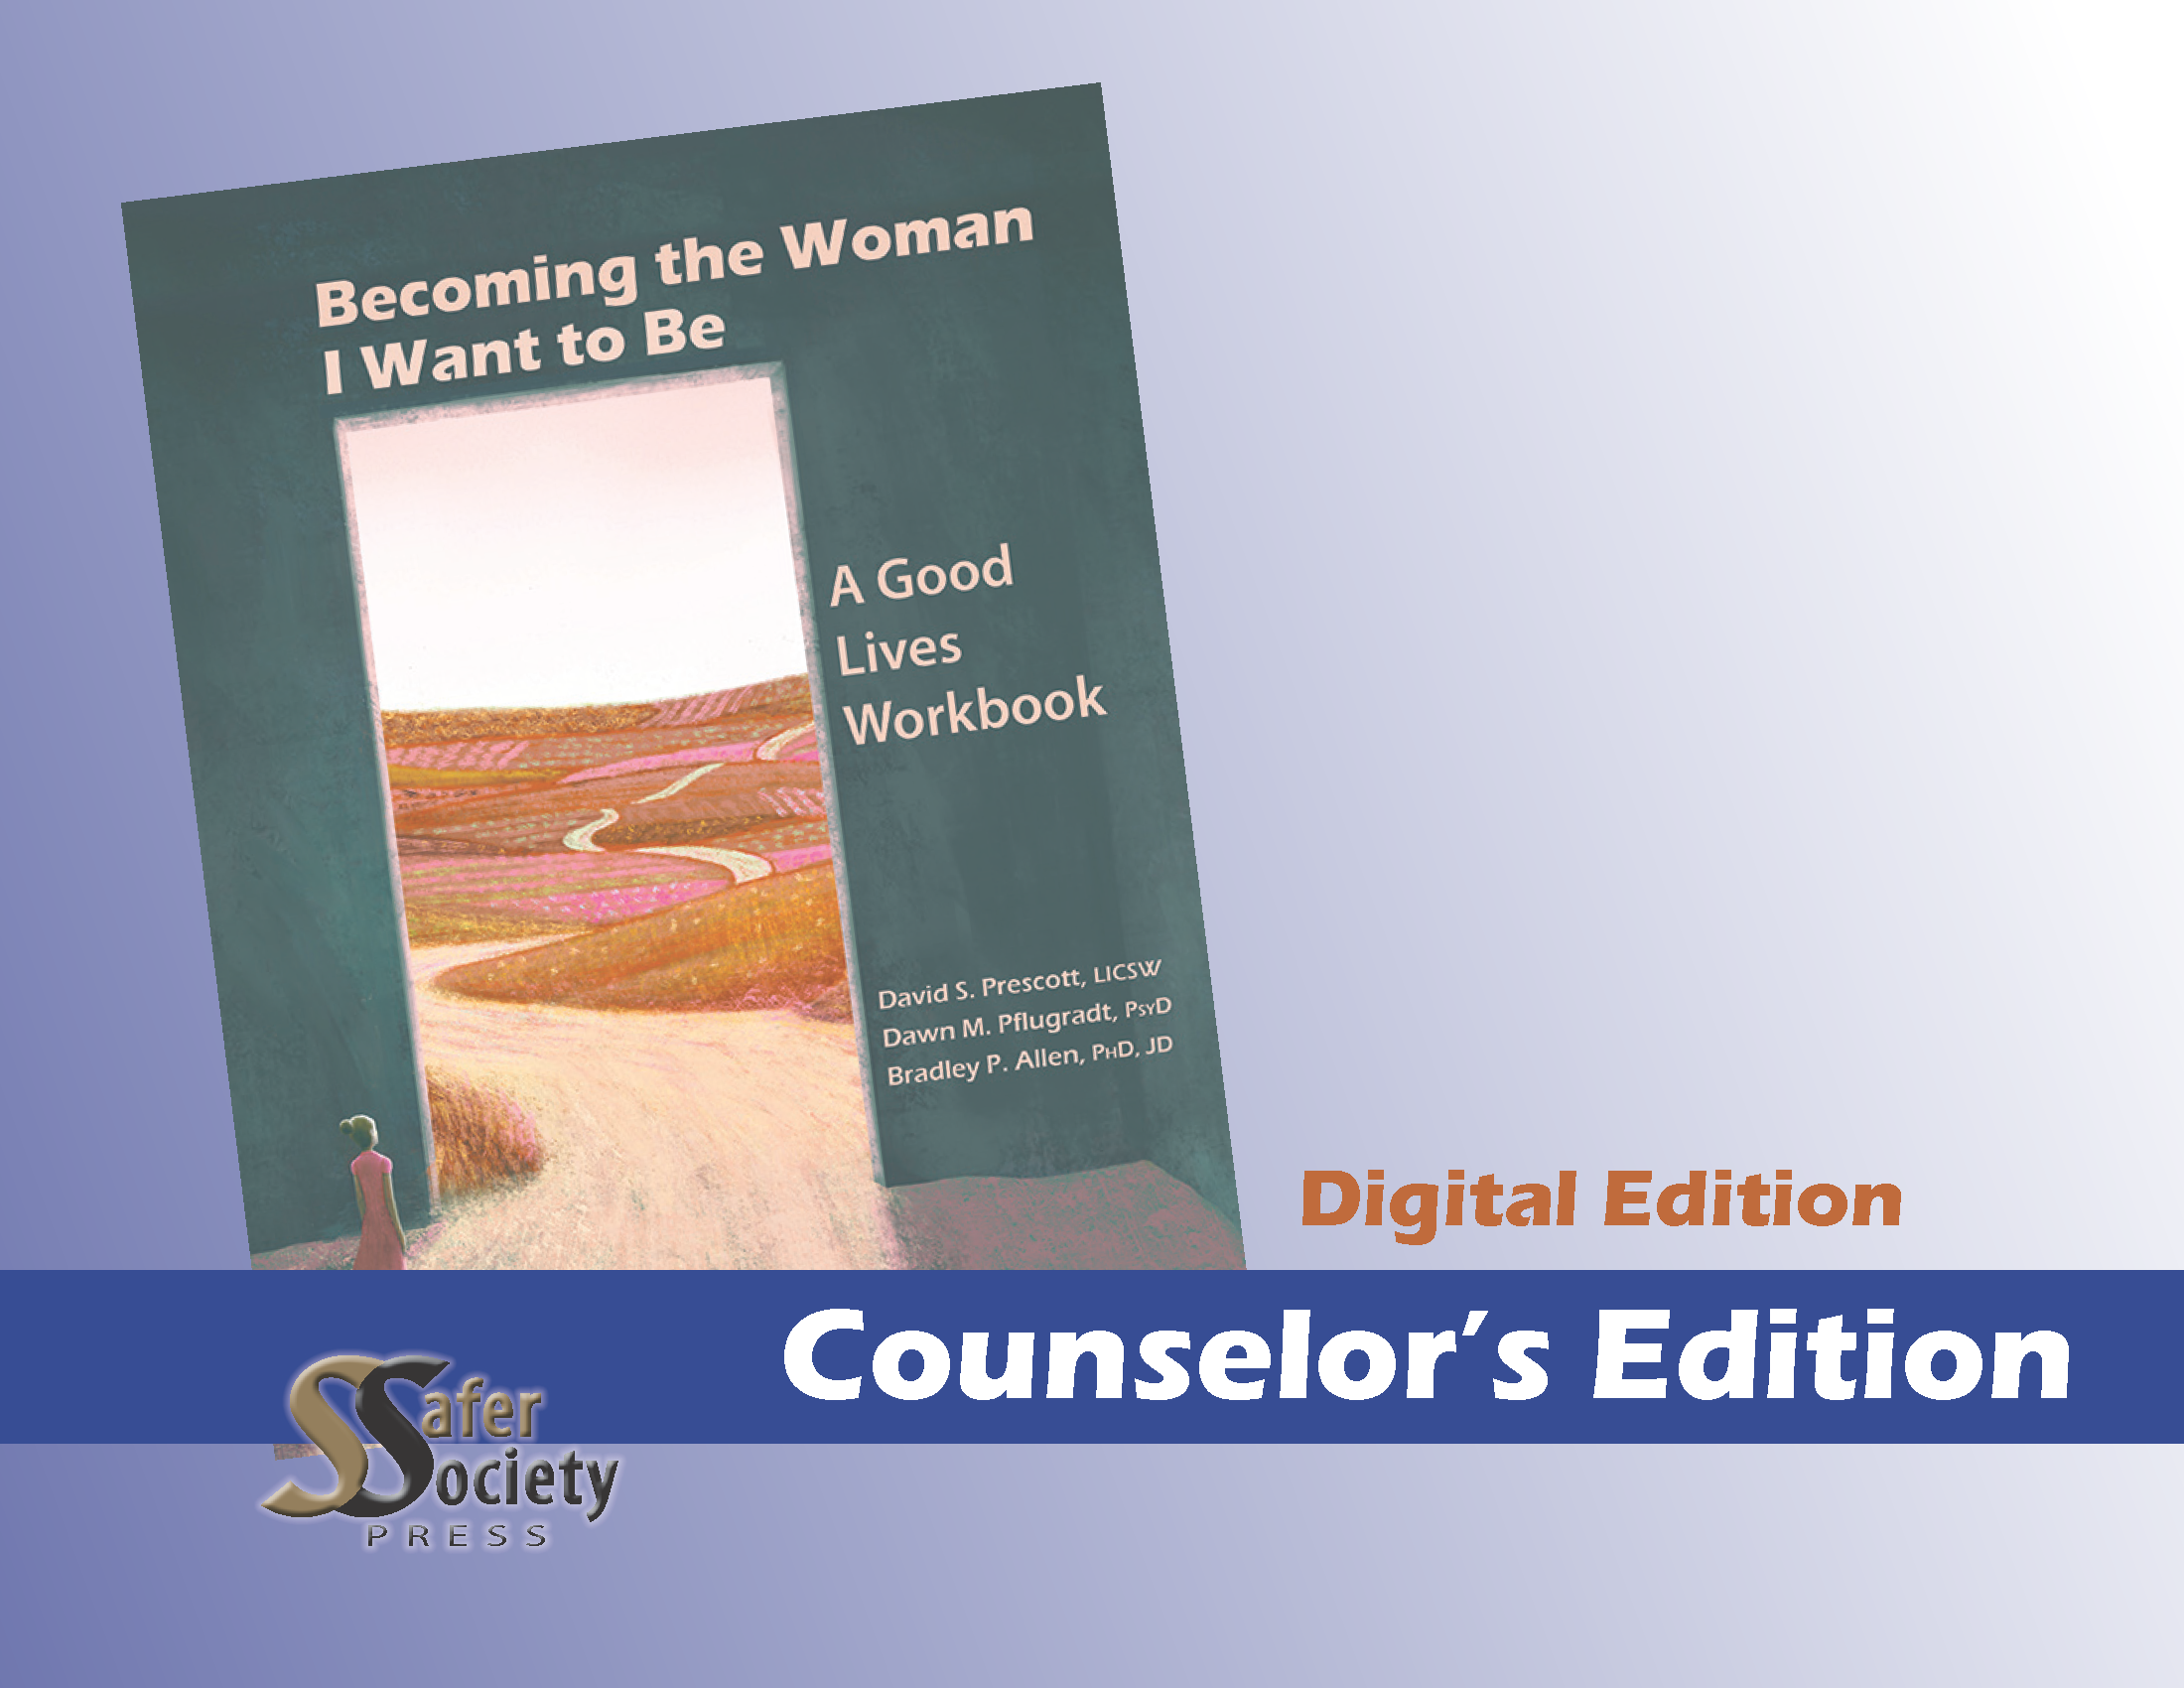 Counselor's Edition: Becoming the Woman I Want to Be - Downloadable PDF